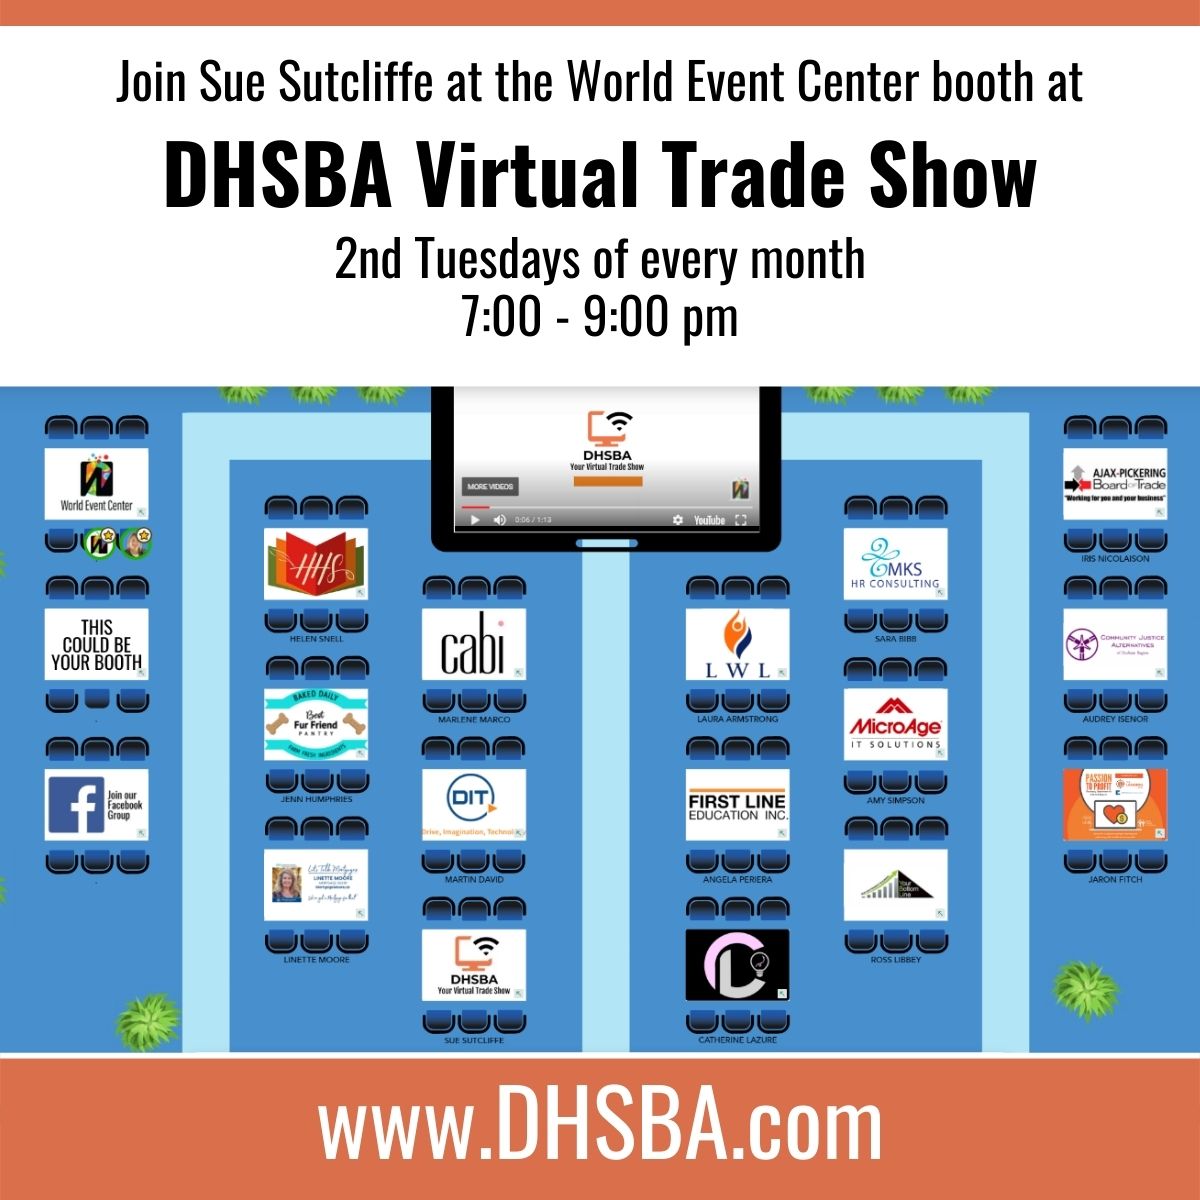 Join Sue at the World Event Center for DHSBA Virtual Trade Show Second Tuesdays 7-9pm EST